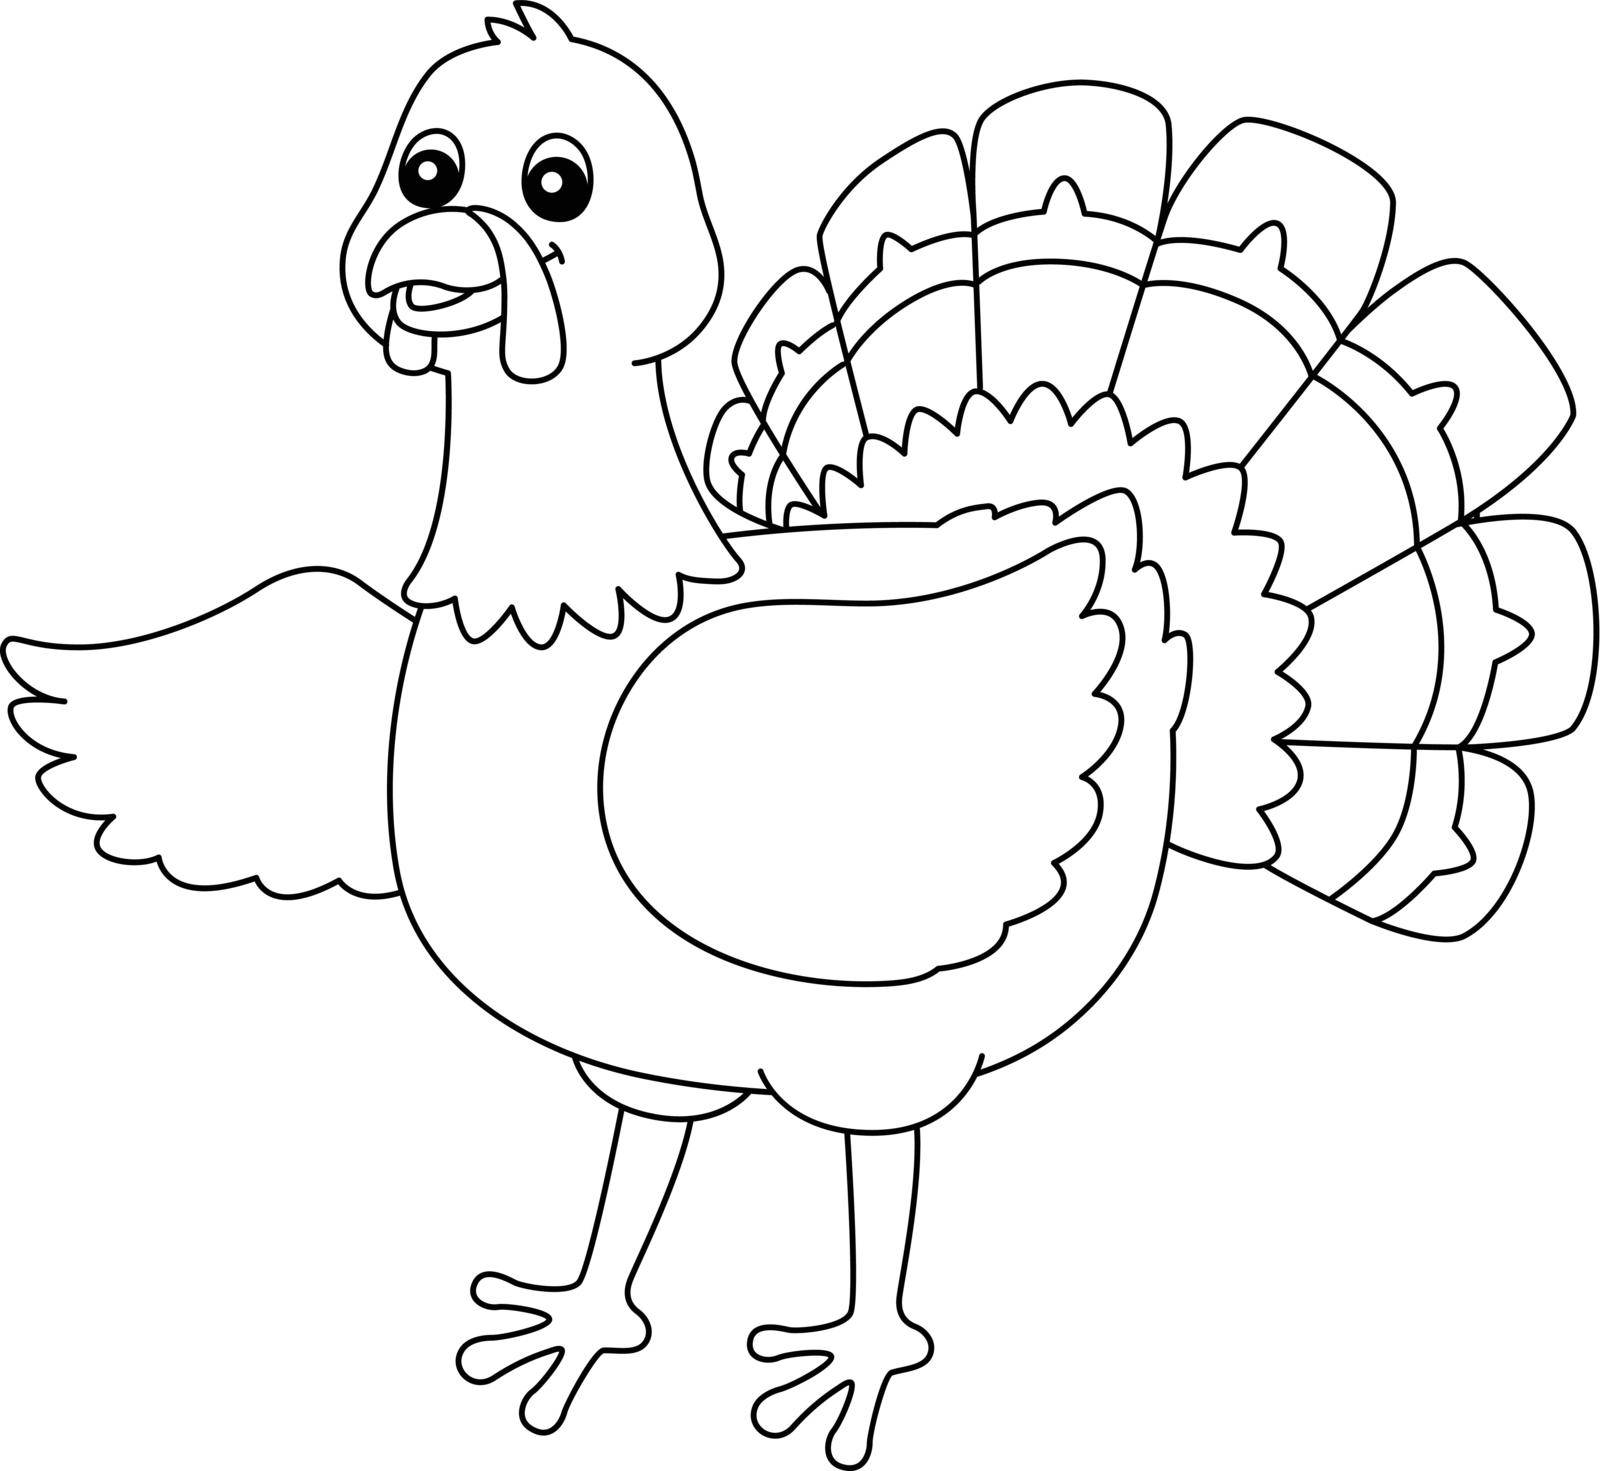 A cute and funny coloring page of a turkey farm animal. Provides hours of coloring fun for children. To color, this page is very easy. Suitable for little kids and toddlers.